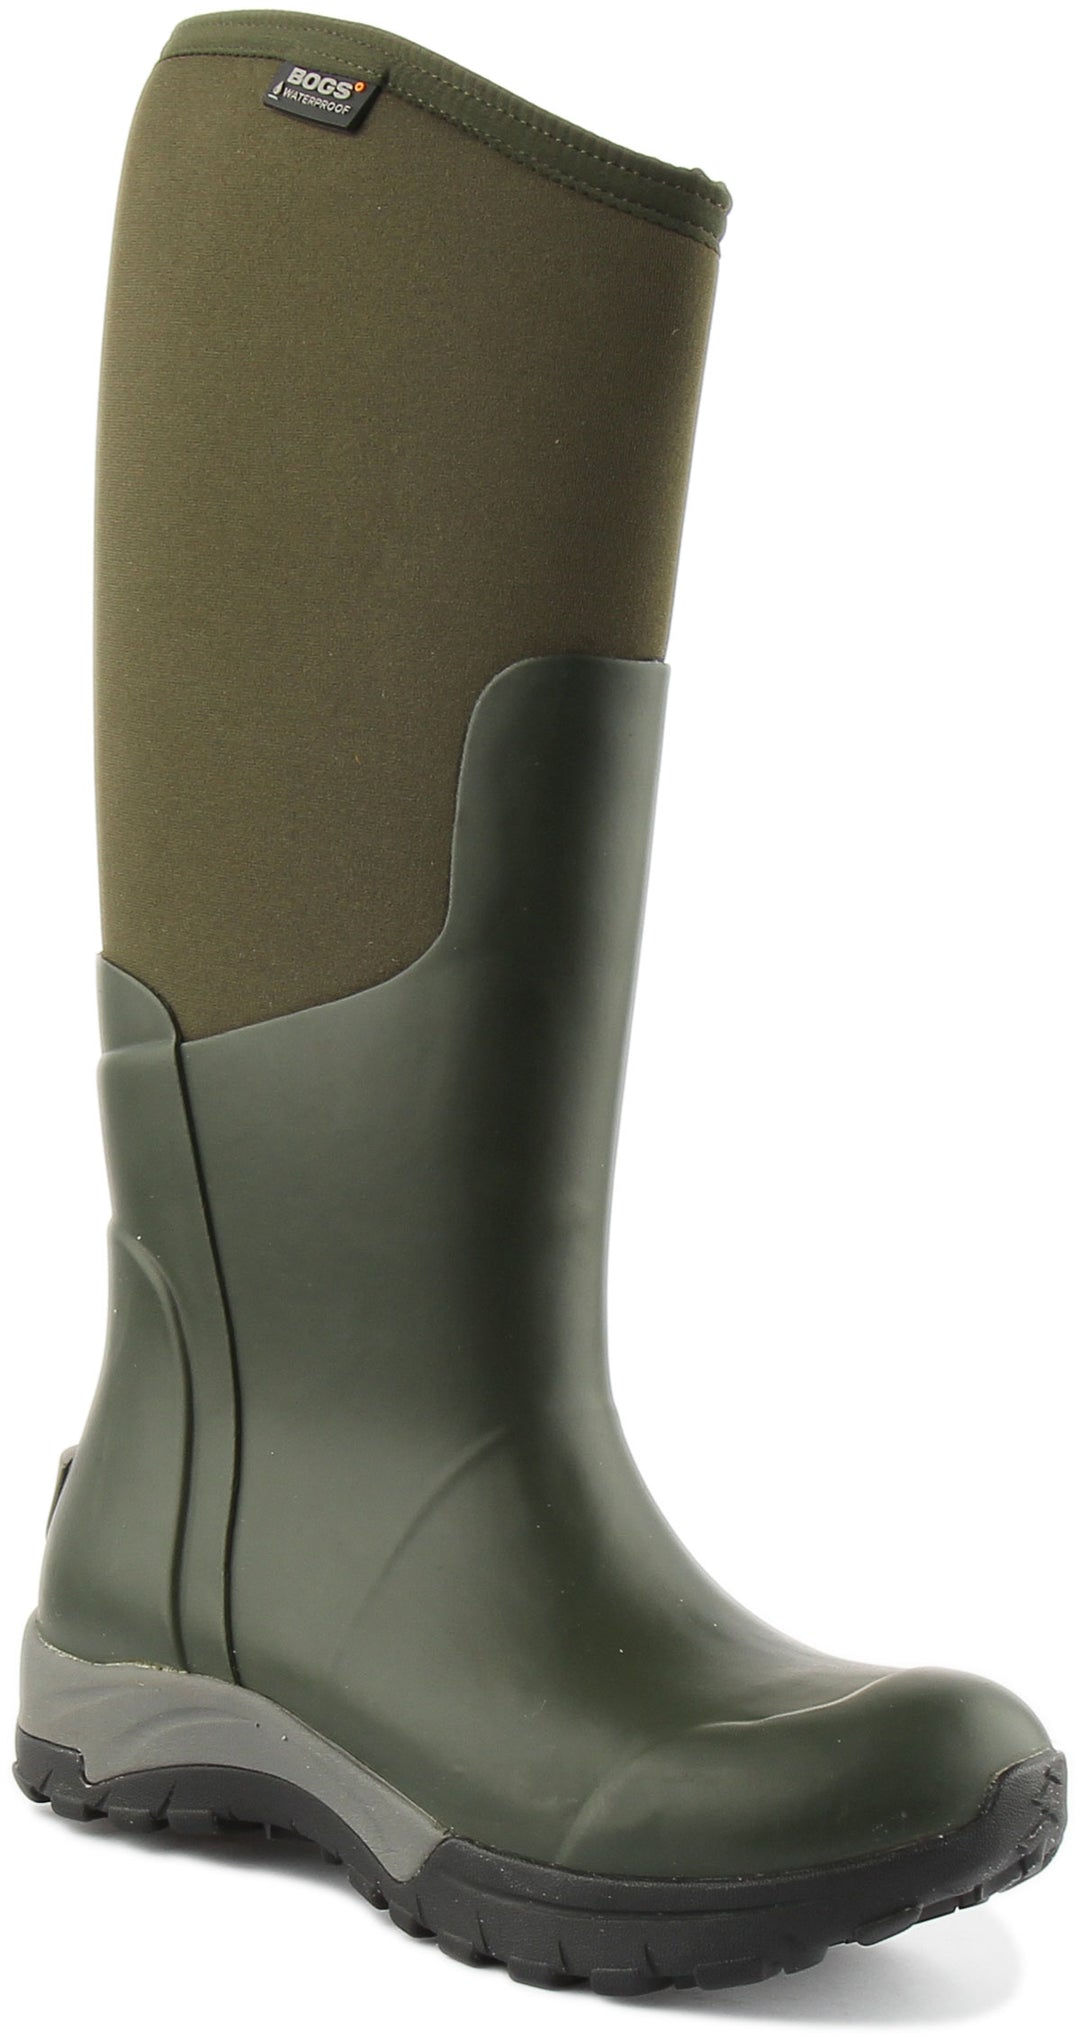 Bogs Essenntial Lite Sld In Olive For Women